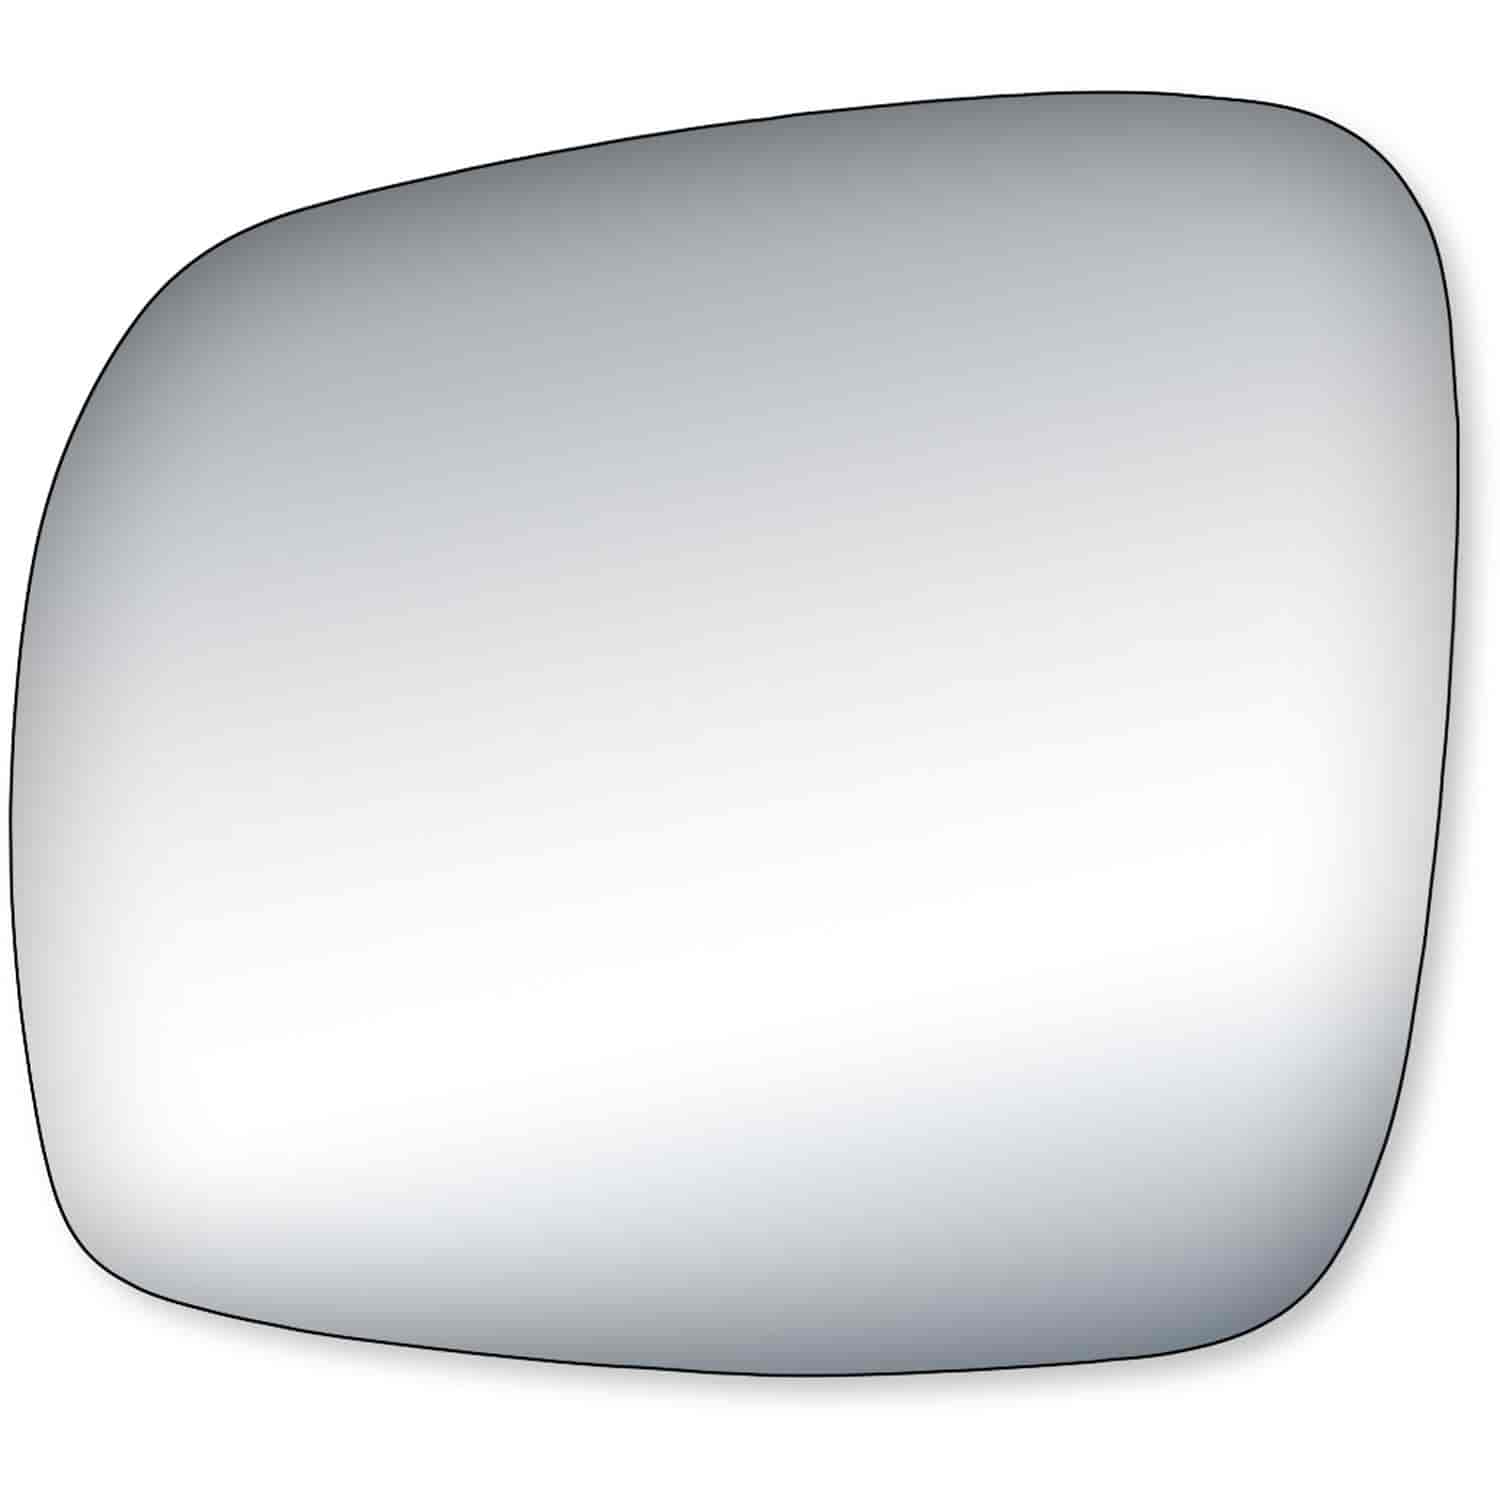 Replacement Glass for 08-14 Town & Country w/out blind spot lens ; 08-14 Gran Carvan w/out blind spo